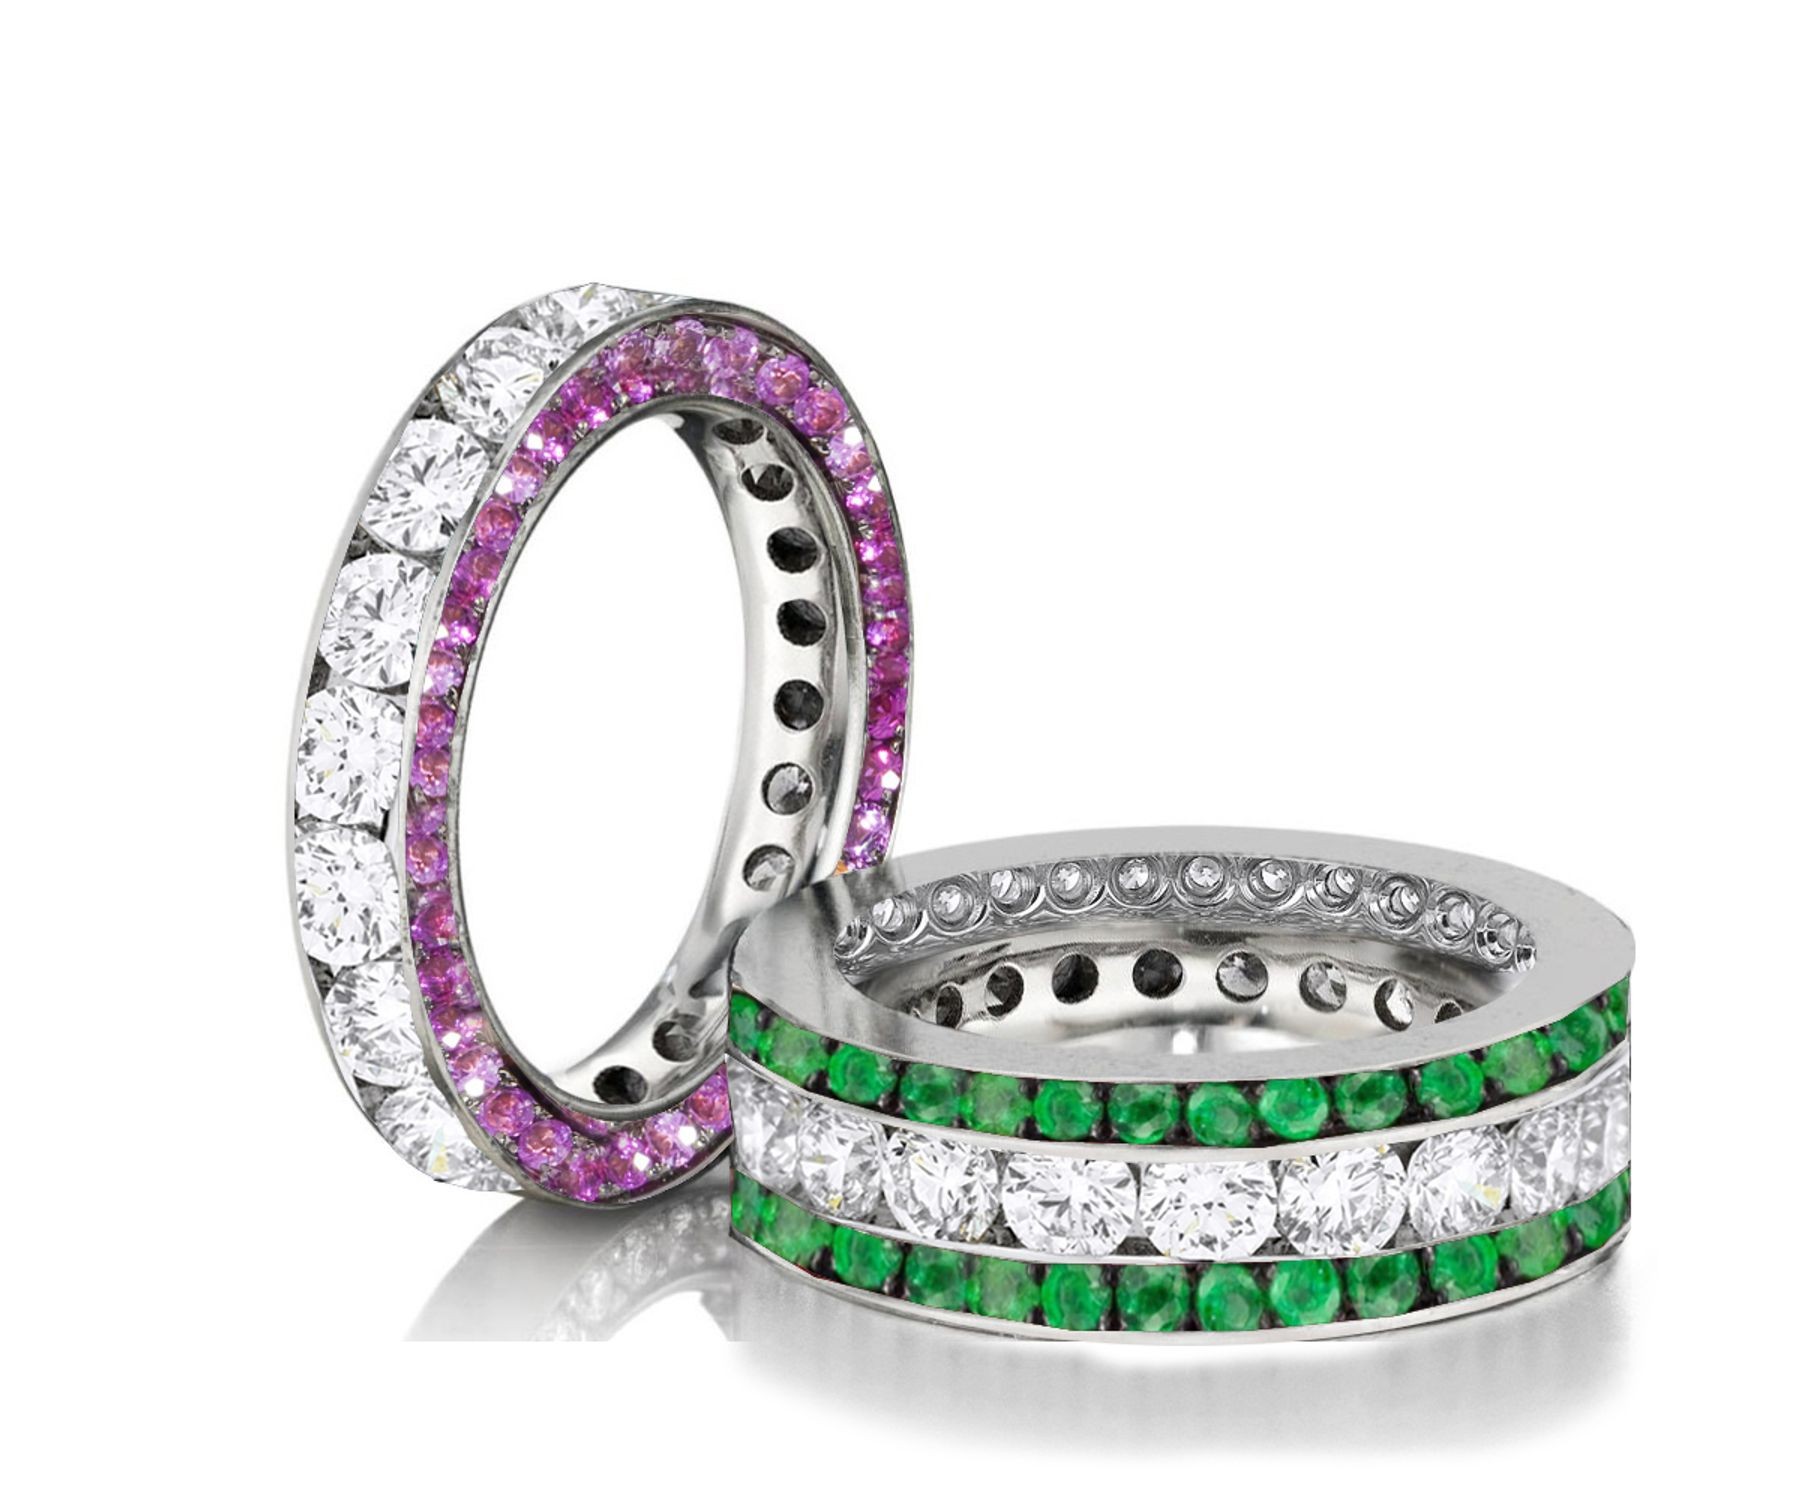 Made to Order Great Selection of Channel Set Brilliant Cut Round Diamonds Emeralds & Pink Sapphires Eternity Rings & Bands